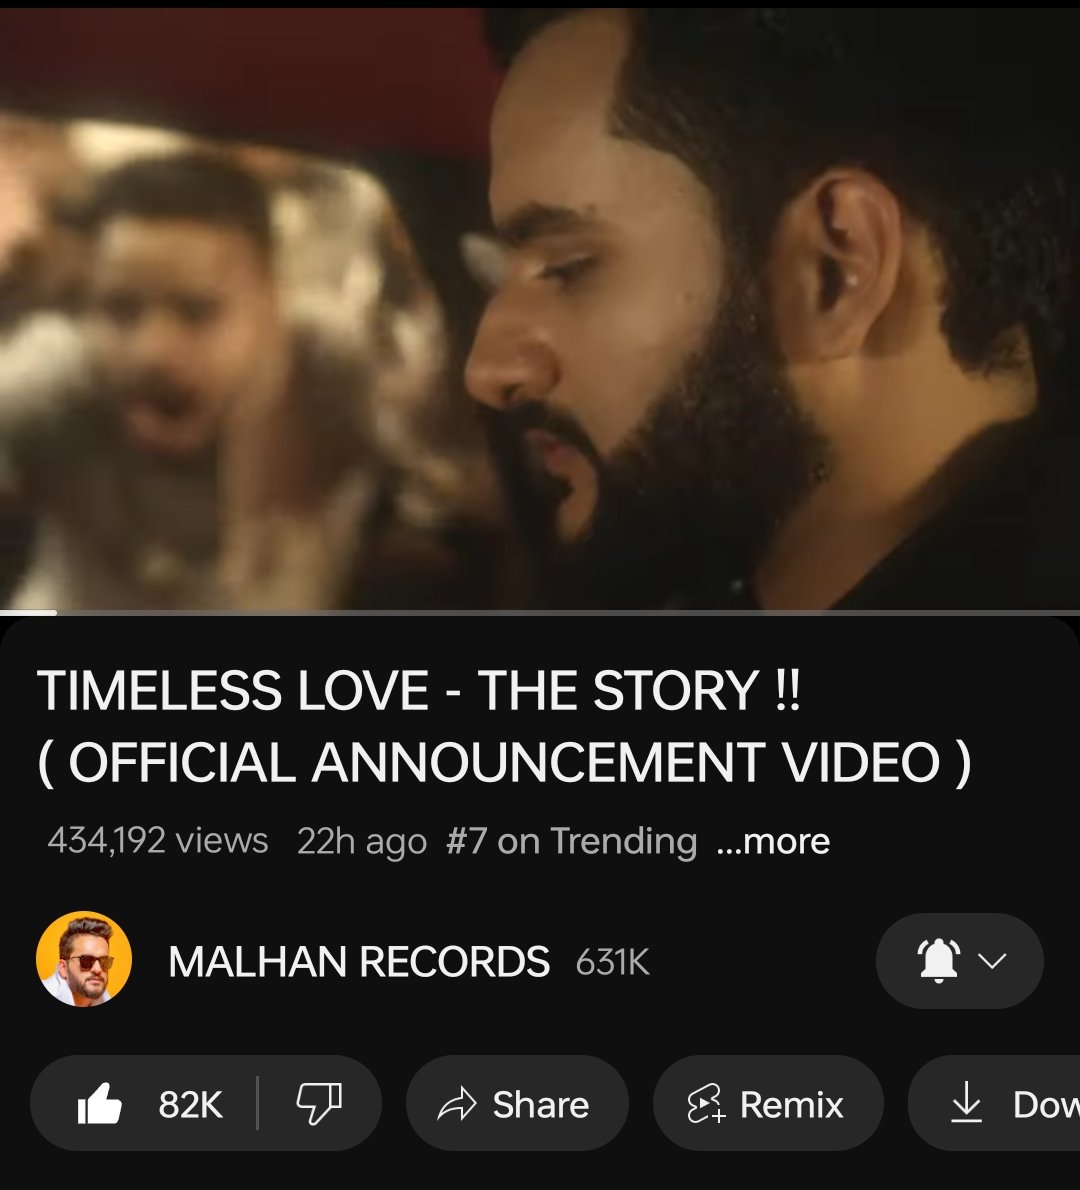 Teaser Trending Number 7 🚀🚀❤️‍🩹

let's go keep Streaming the song & teaser. and don't forget to share it with your friends and family.

#TimelessLove #AbhishekMalhan
#FukraInsaan #PandaGang
#TimelessLoveByAbhishek